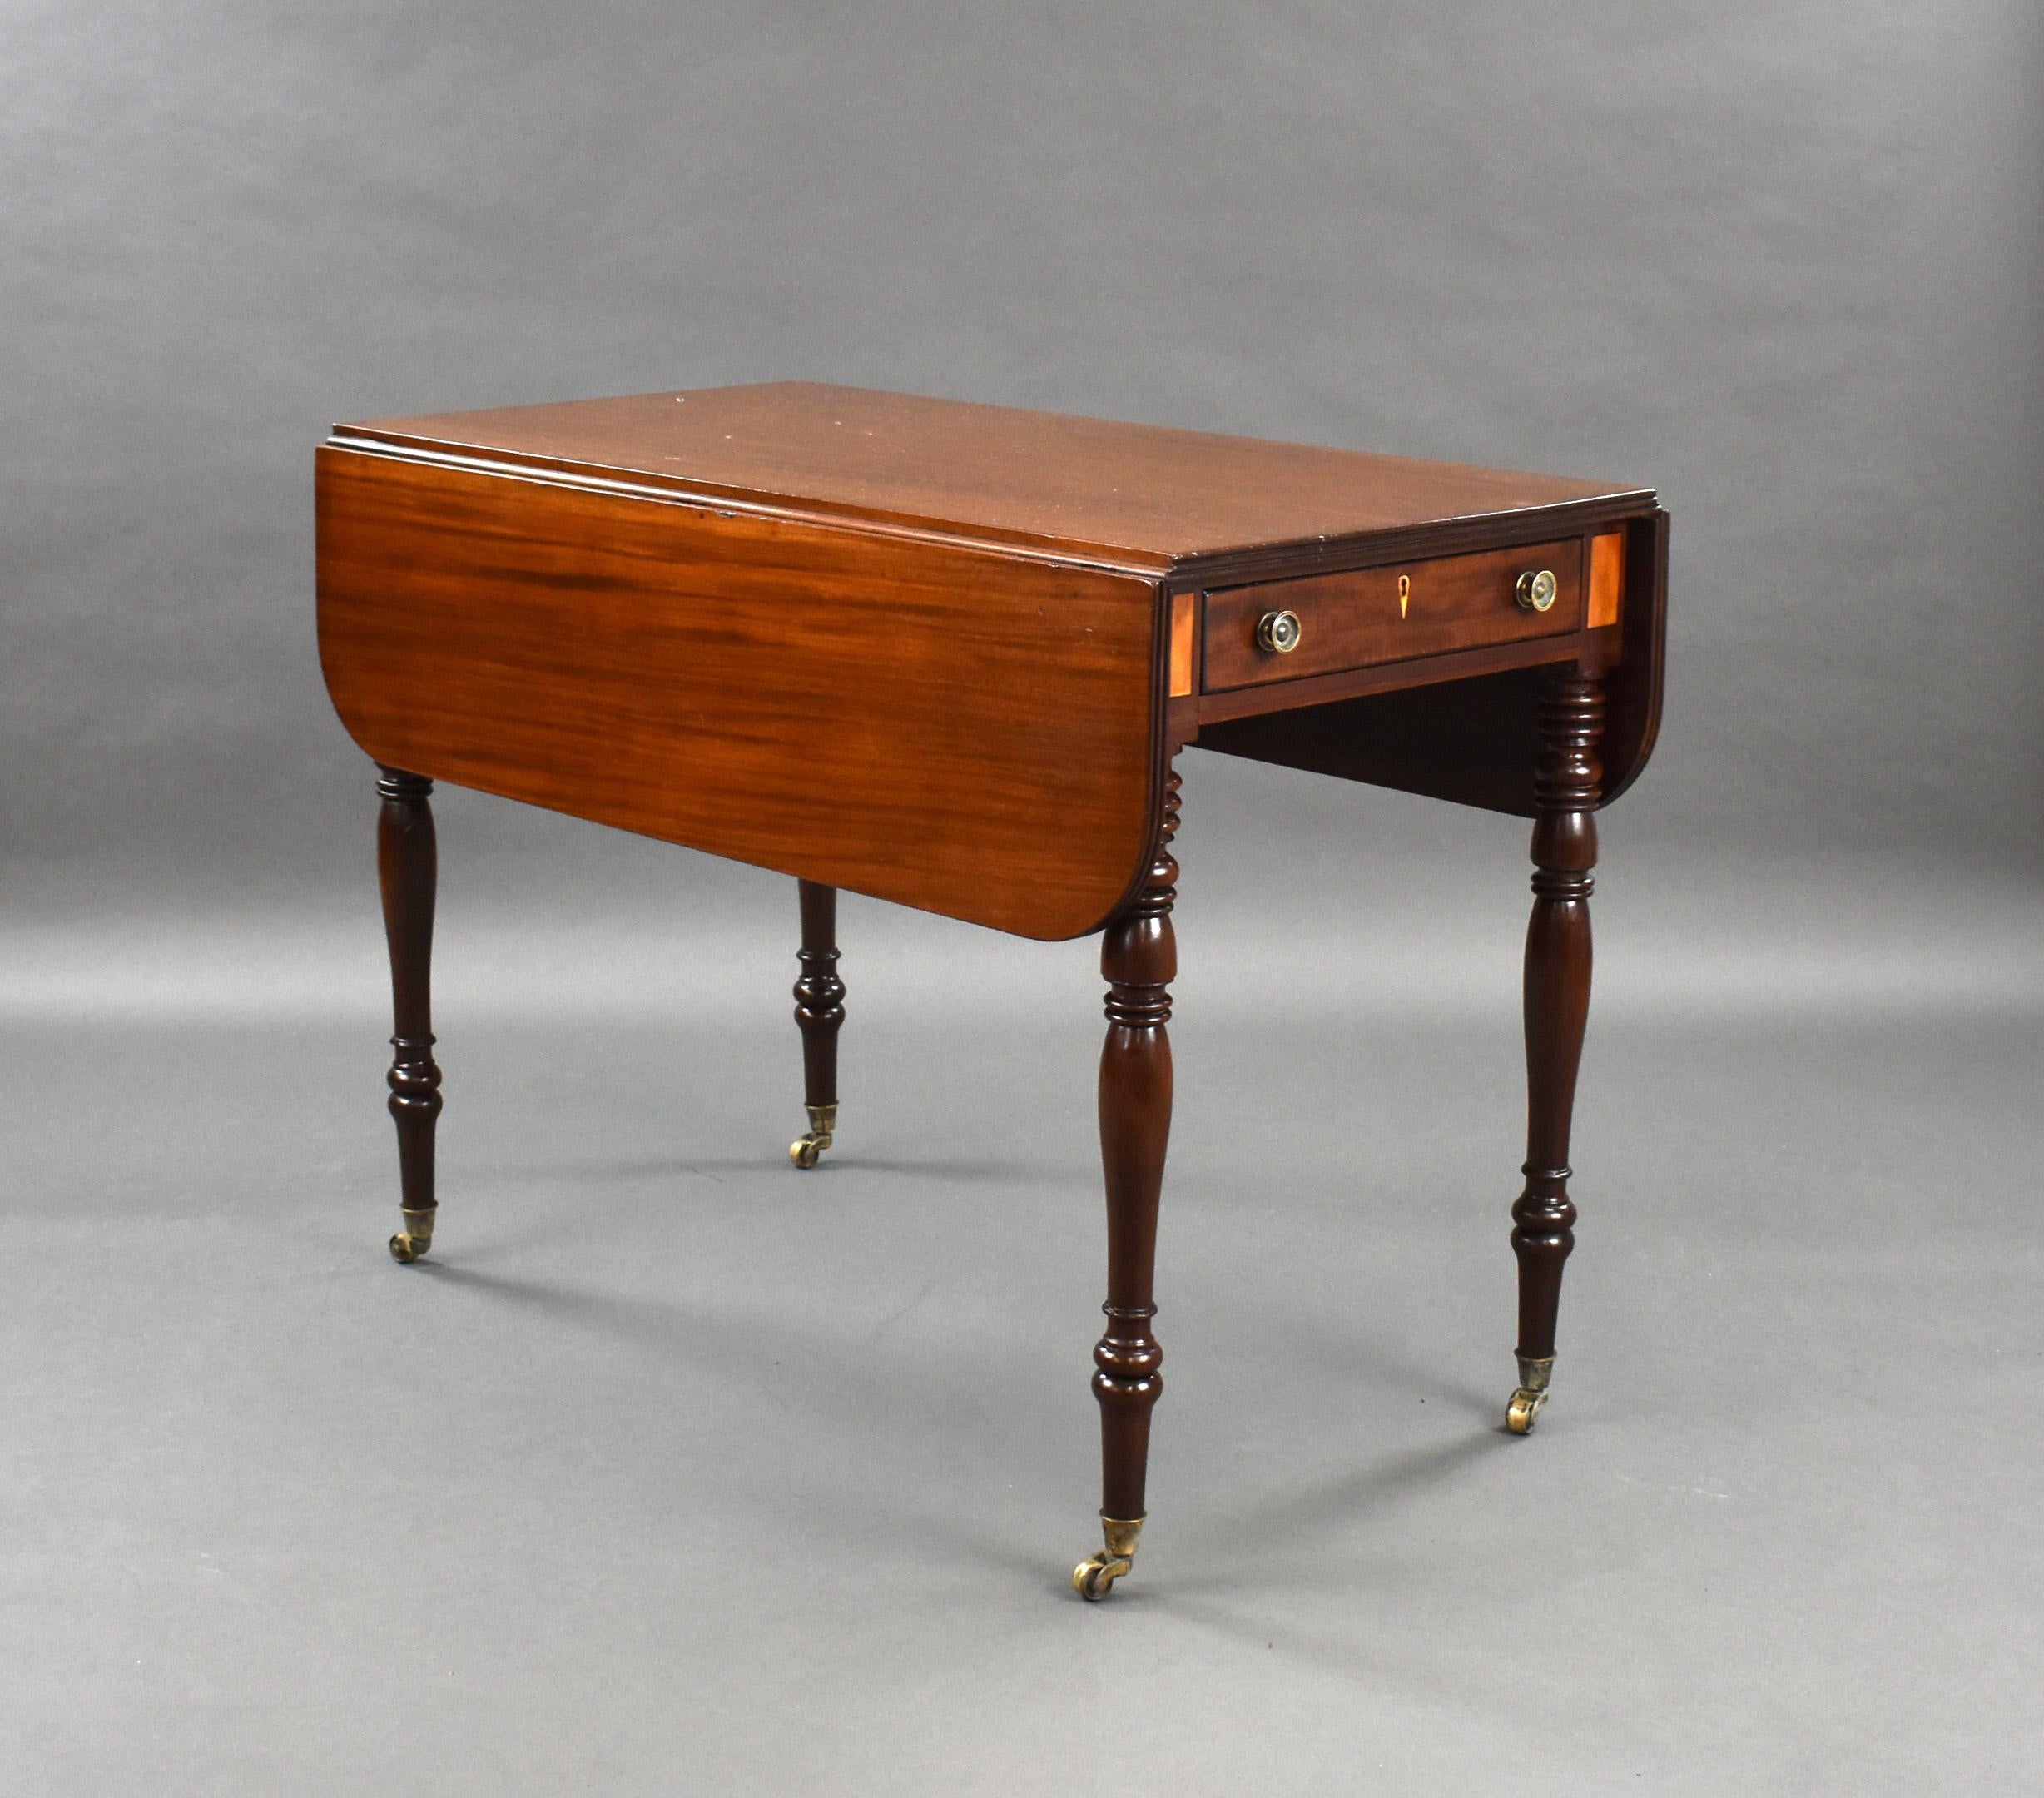 For sale is a good quality Regency mahogany pembroke table, having two drop leaves above a single drawer to the front and a faux drawer on the opposing side. The table stands on elegant turned legs raised on original brass castors. This piece is in